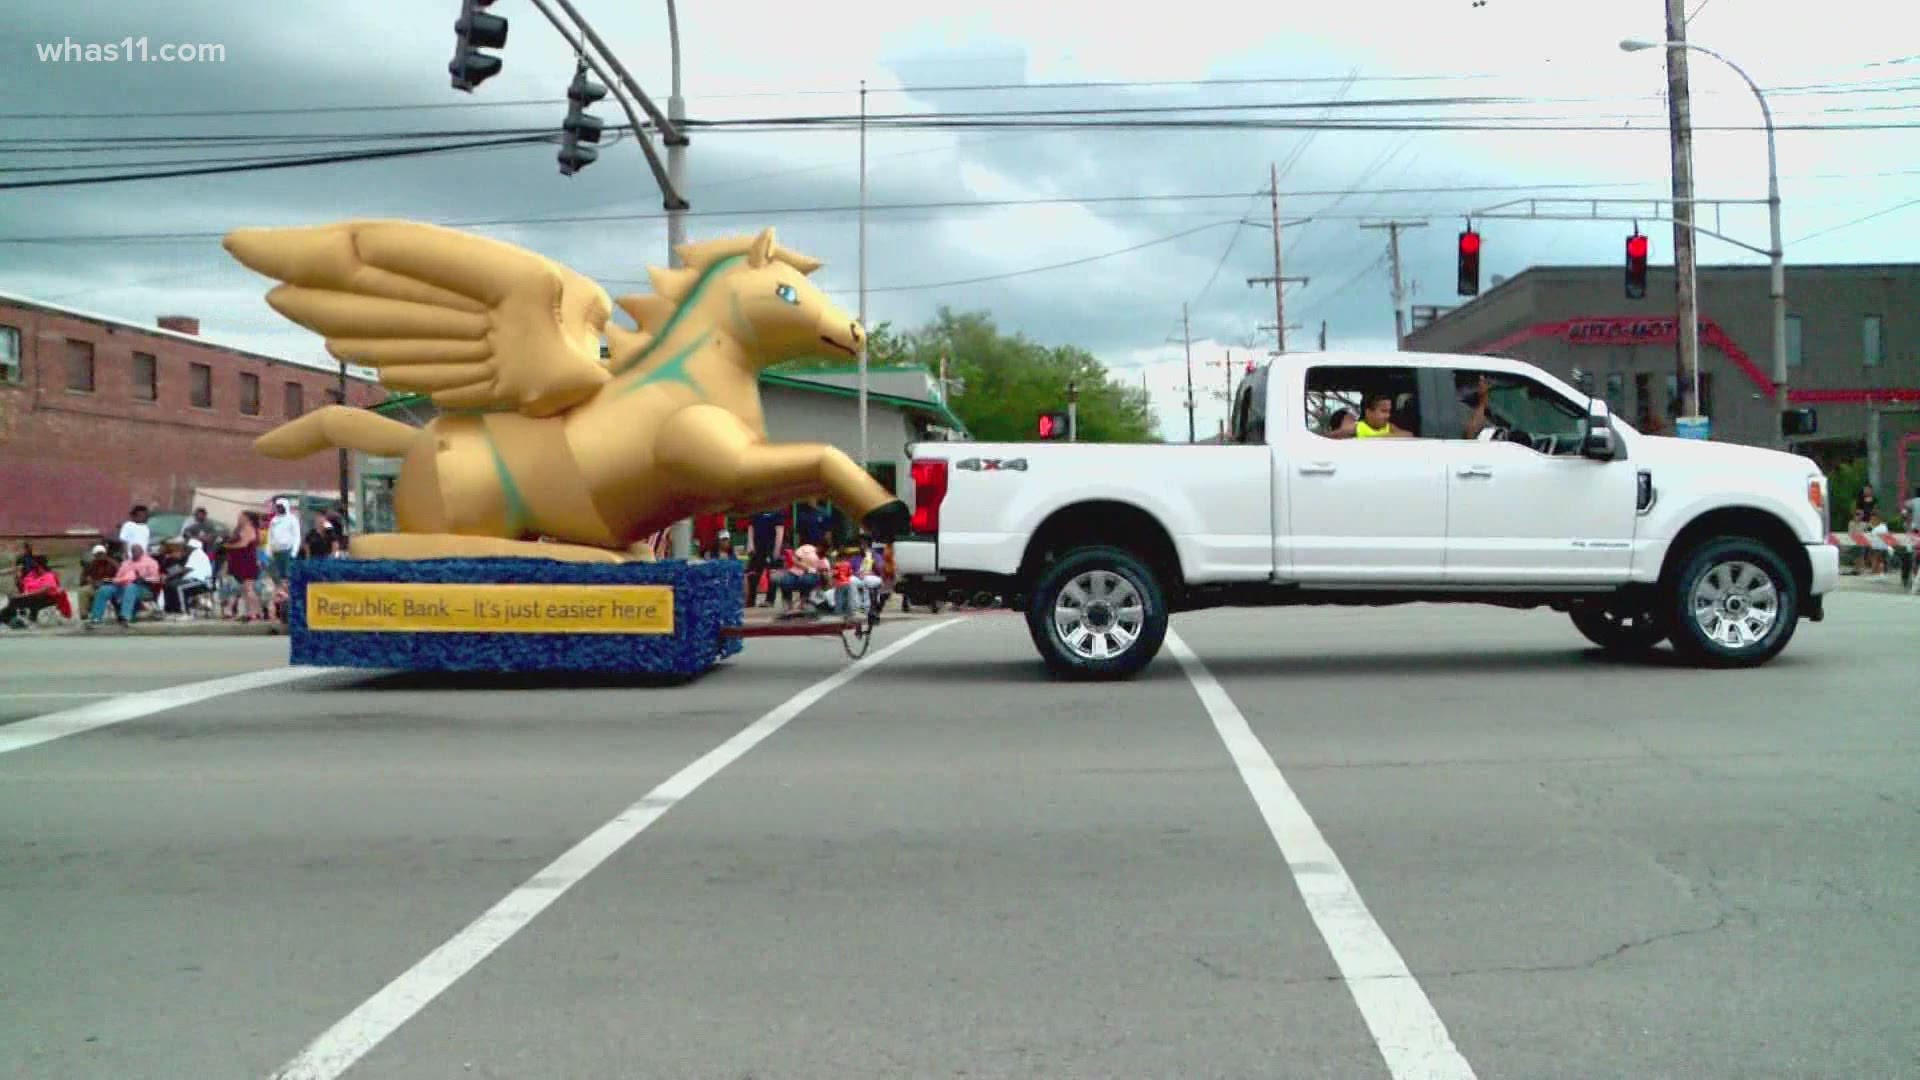 This parade will be unlike any other - traveling nearly 60 miles to bring joy through the Louisville community.